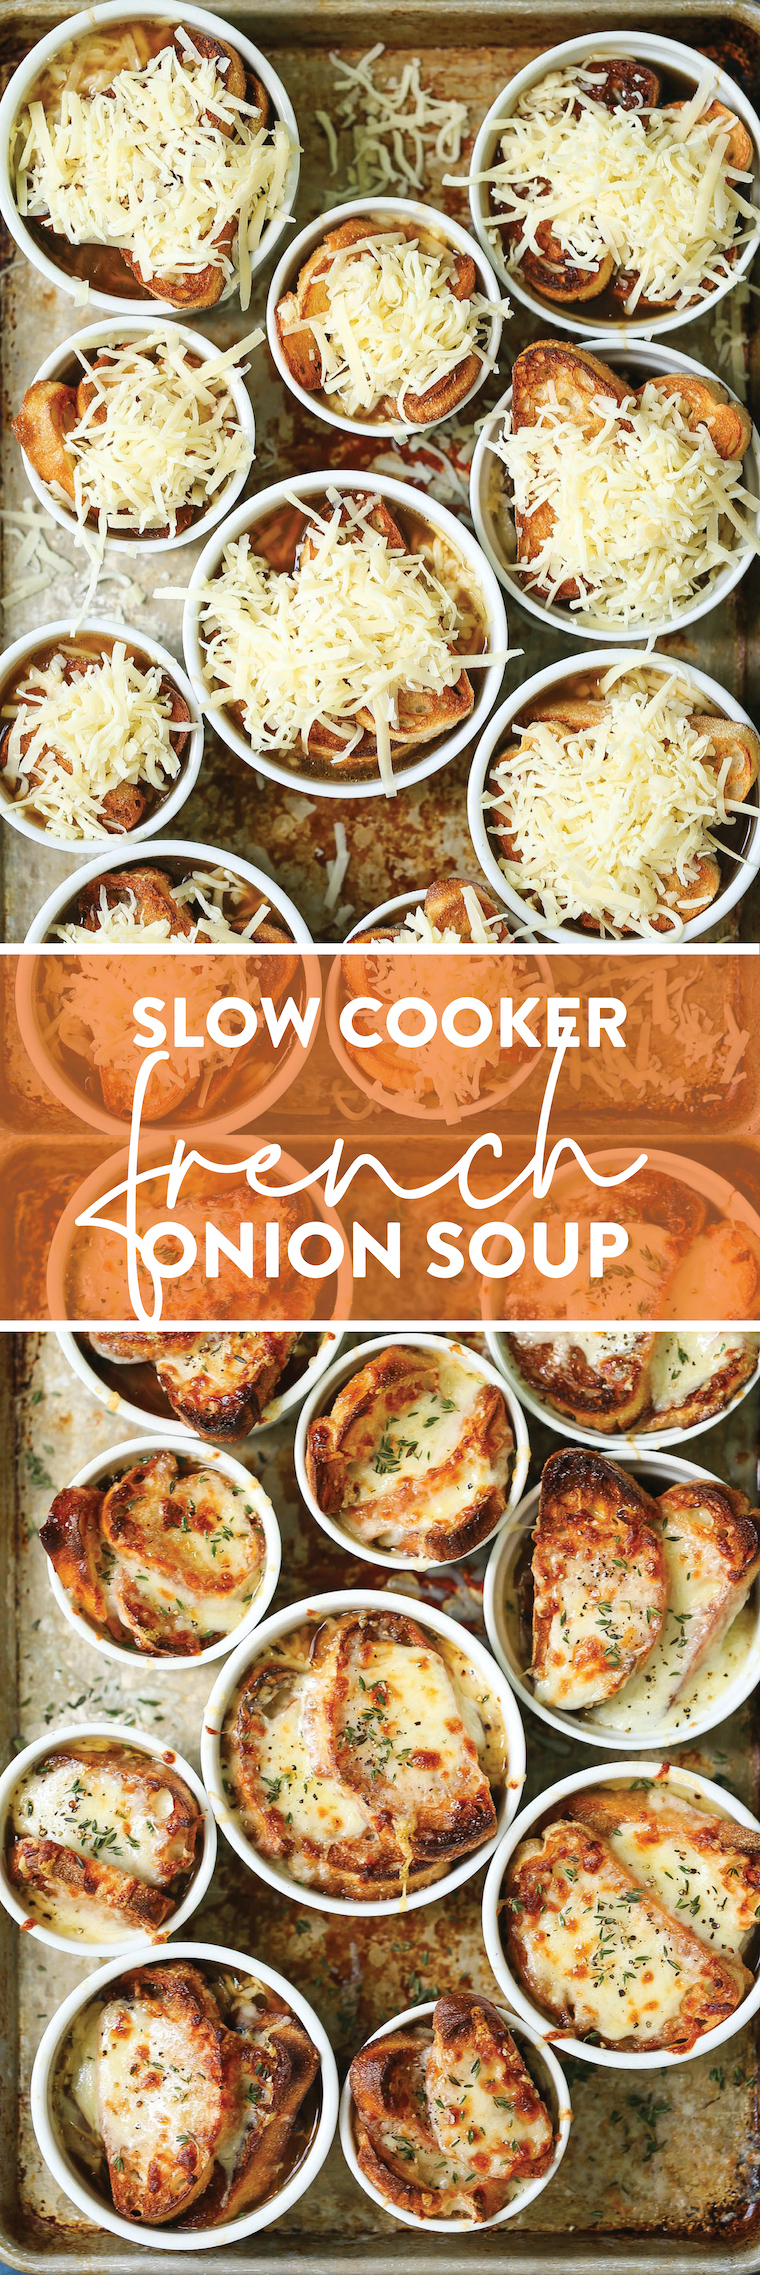 Slow Cooker French Onion Soup - Yes, you can make French onion soup in the crockpot! Ridiculously easy with basically no stirring and no work!